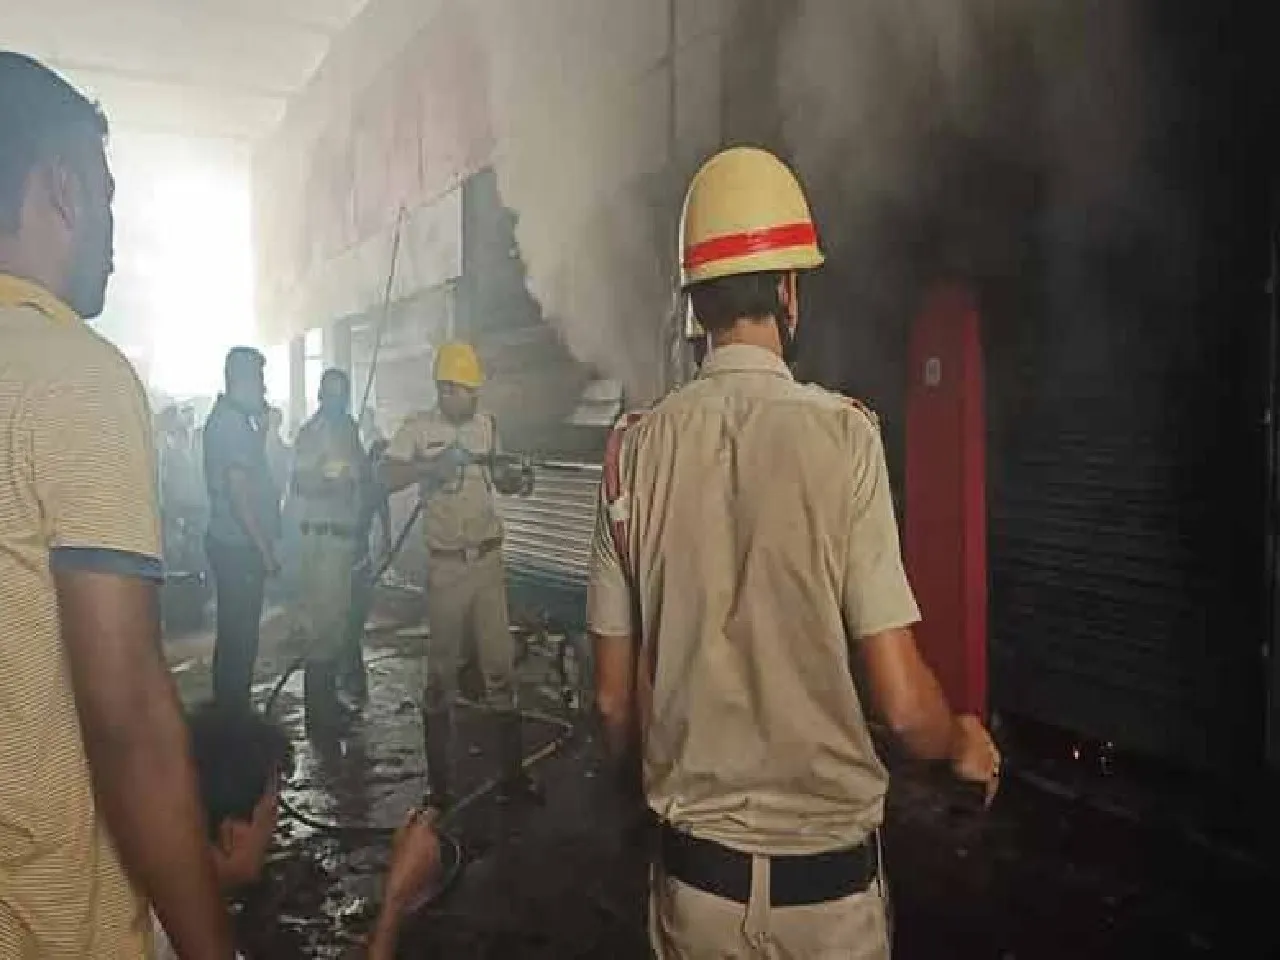 BREAKING: Death toll rises in explosion in English Bazar